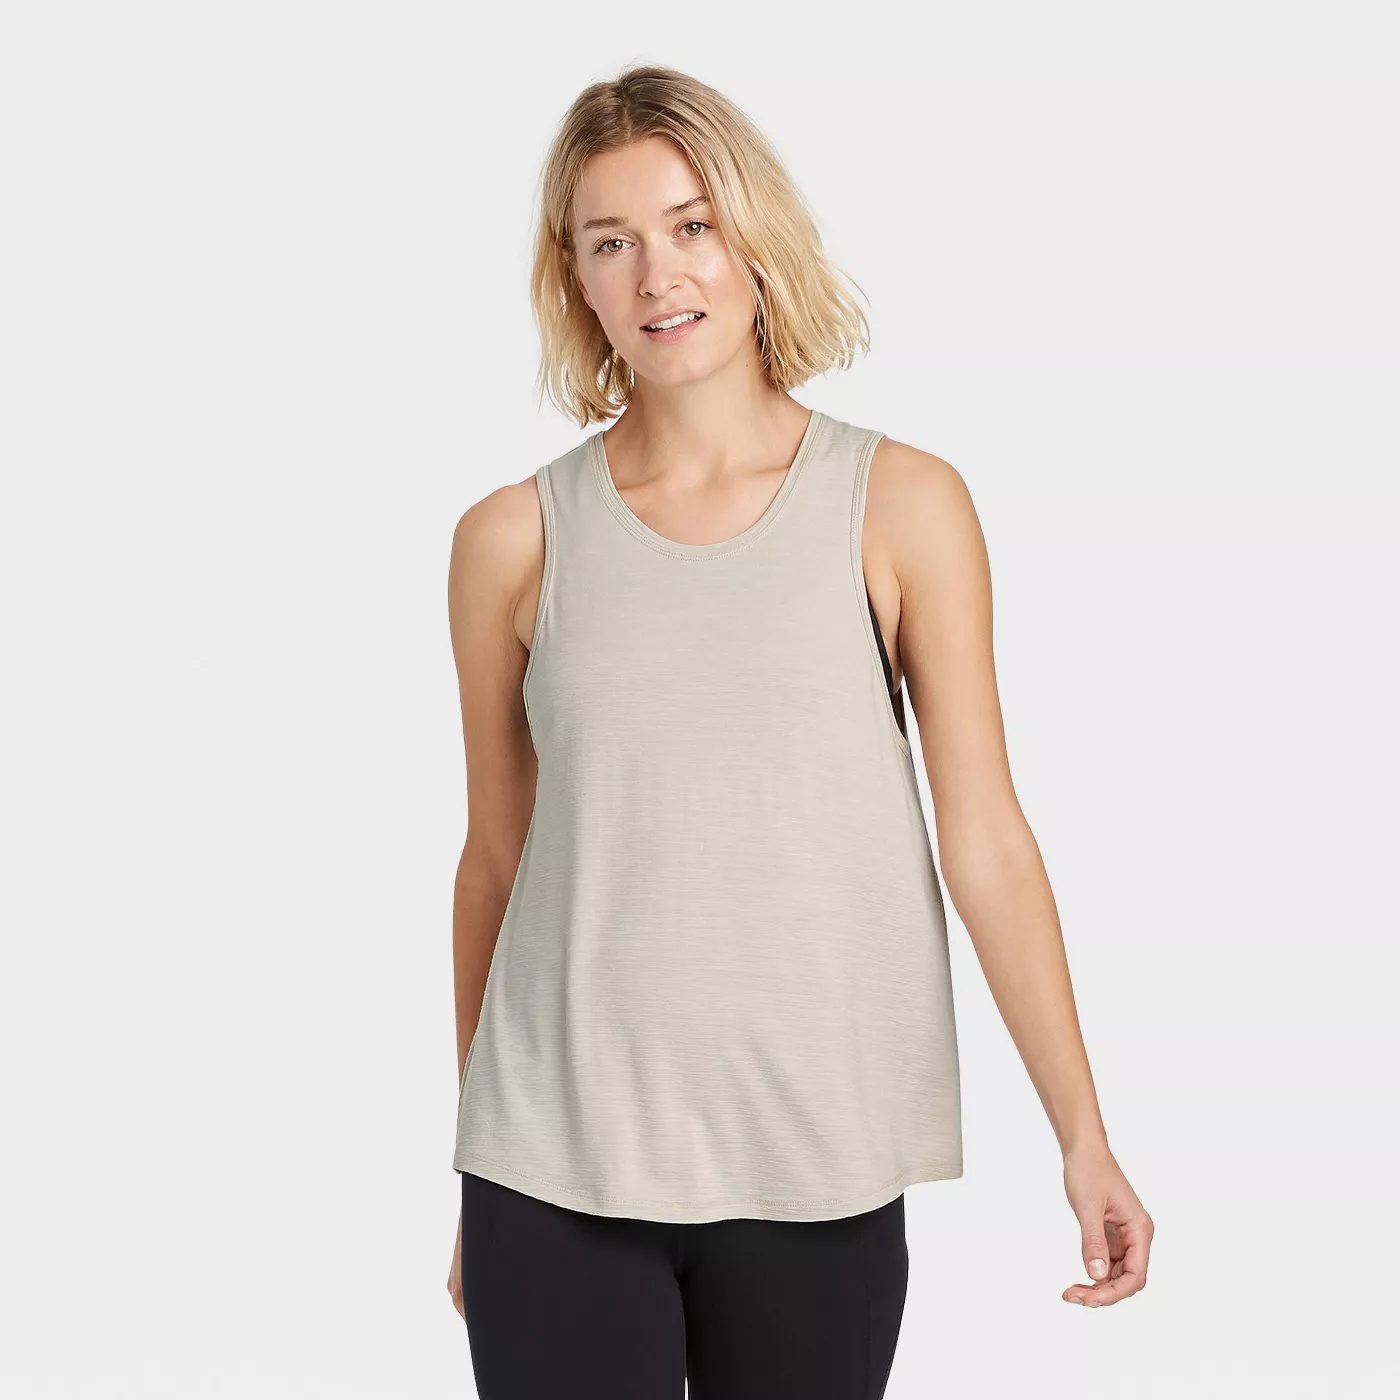 Women's Active Tank Top - All in Motion™ - image 1 of 11